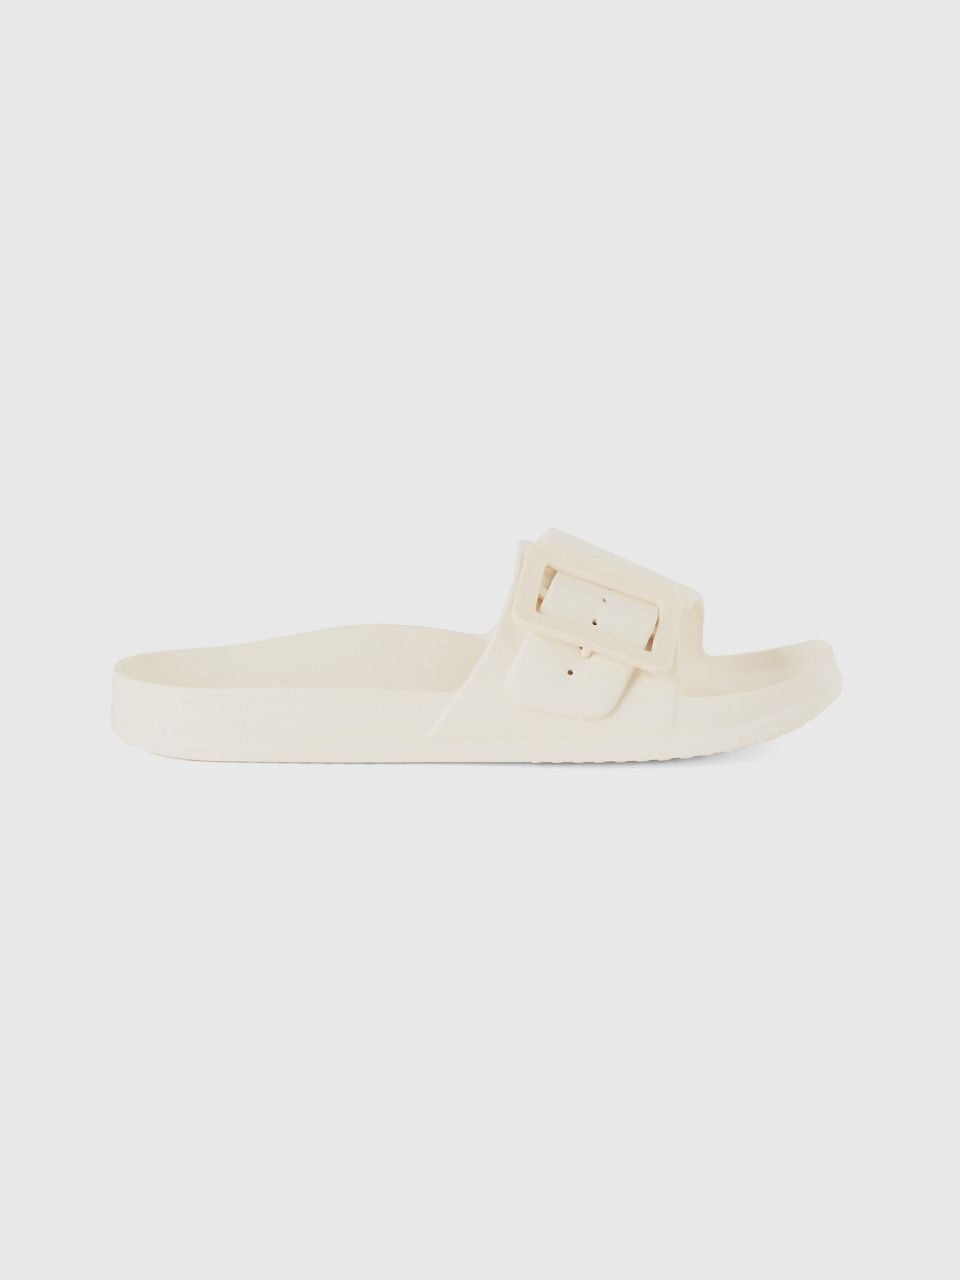 Benetton, Sandals With Band And Buckle,5-7, Creamy White